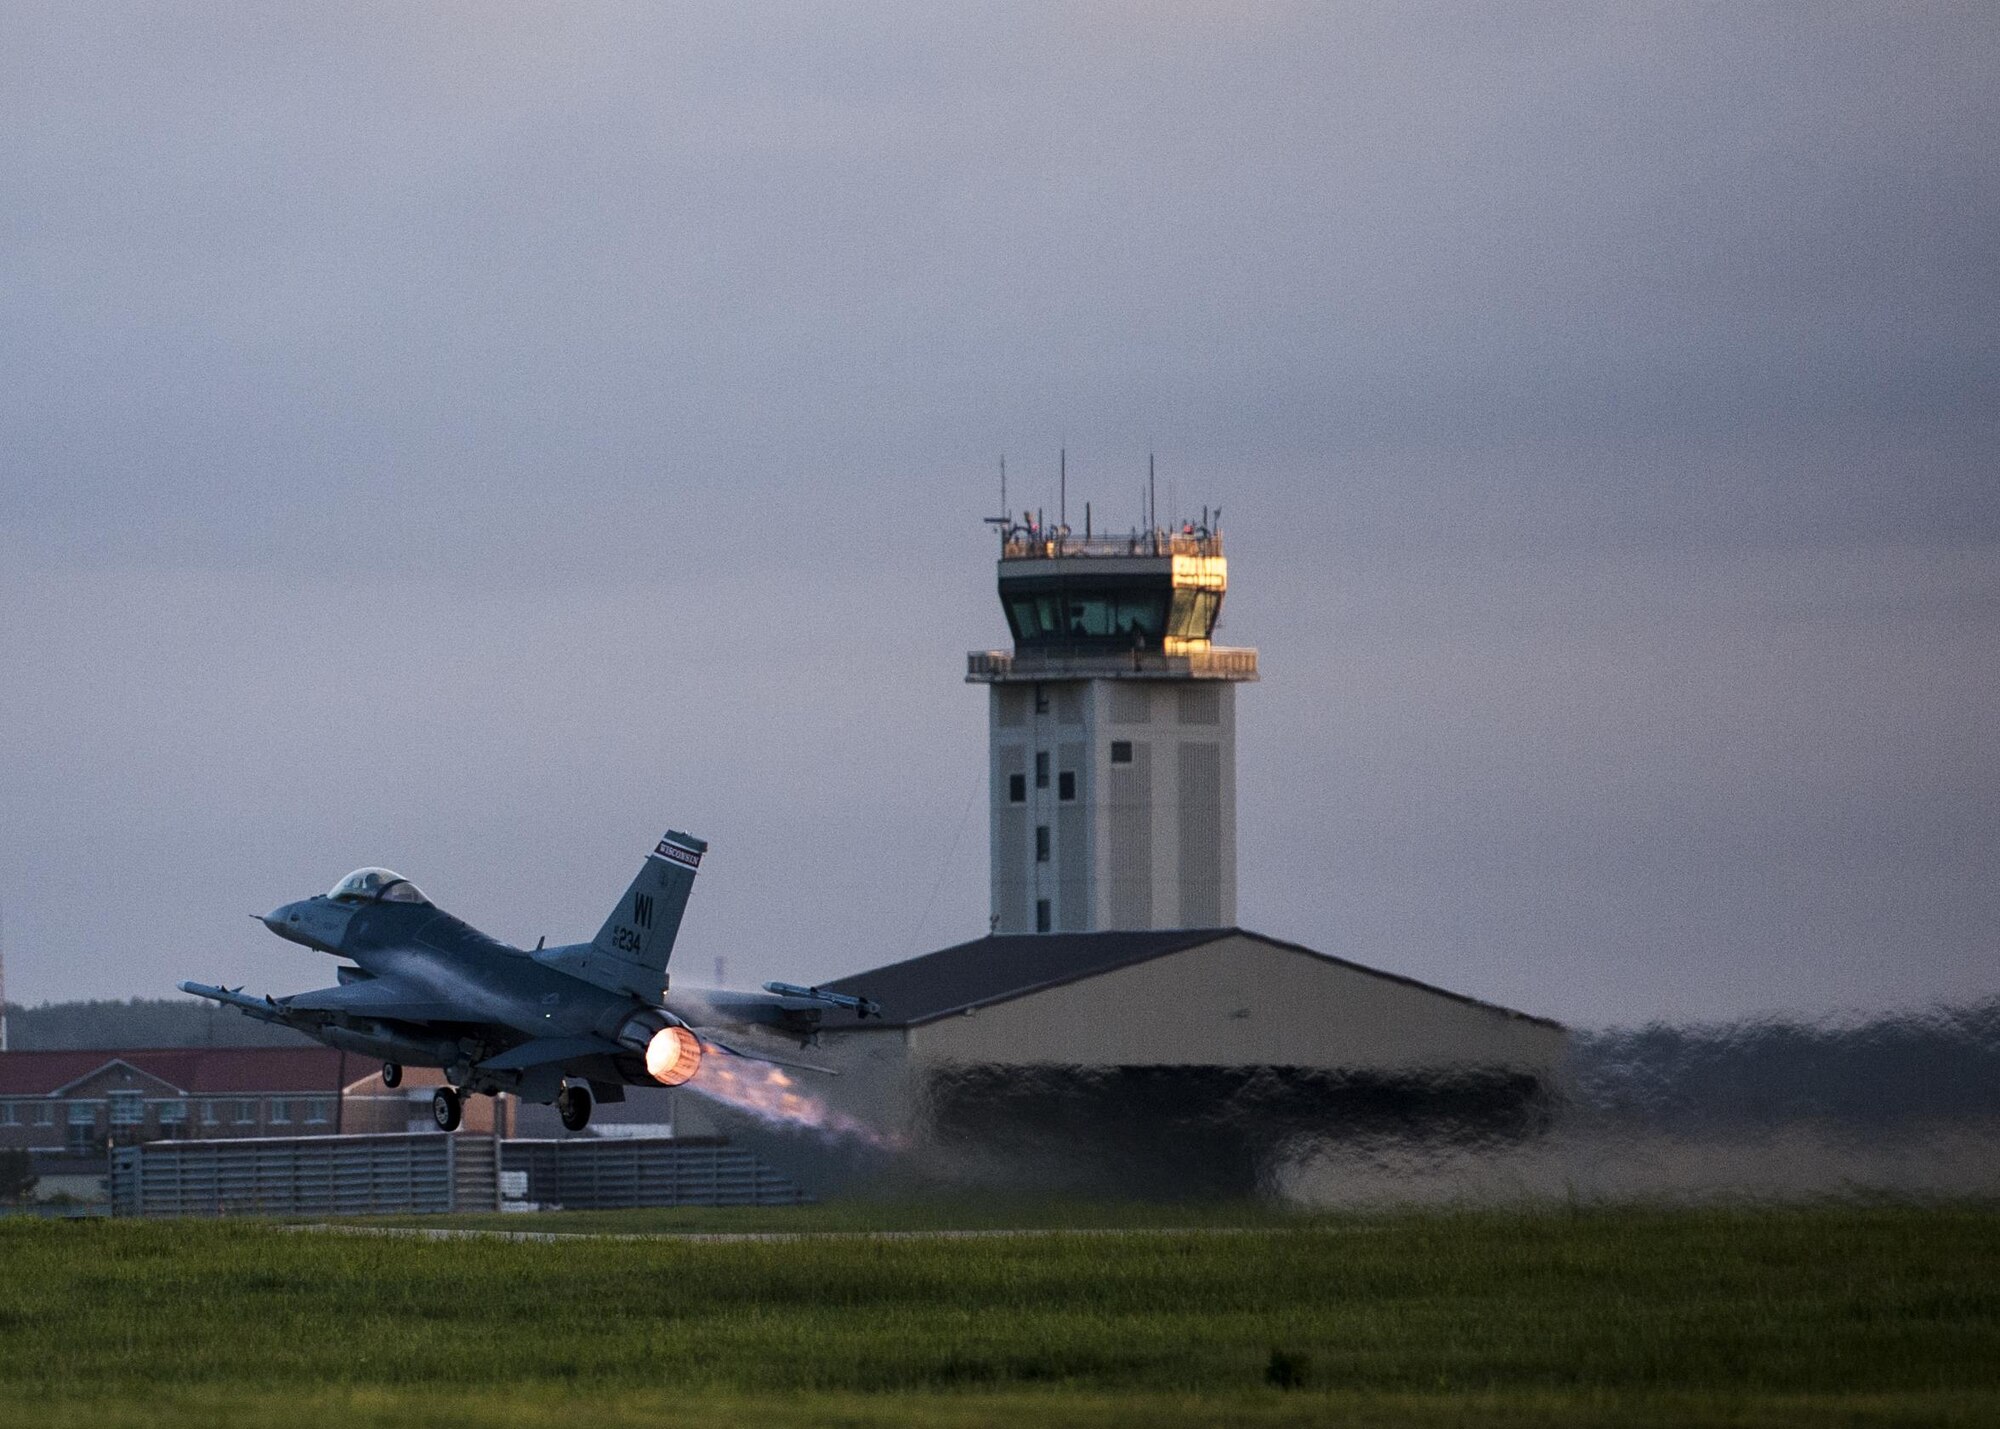 A U.S. Air Force F-16 Fighting Falcon takes off from the runway at Kunsan Air Base, Republic of Korea, Aug. 23, 2017. Airmen assigned to the 8th Fighter Wing and the 115th Fighter Wing, Wisconsin Air National Guard, participated in Beverly Pack 17-3, a five-day, regularly-scheduled operational readiness exercise, which tested the base’s ability to respond to various scenarios in a contingency environment. Airmen from the 115th FW are deployed to Kunsan for a 4-month rotation as part of a Theater Security Package, which helps to maintain a deterrent against threats to regional security and stability. (U.S. Air Force photo by Senior Airman Colville McFee/Released)